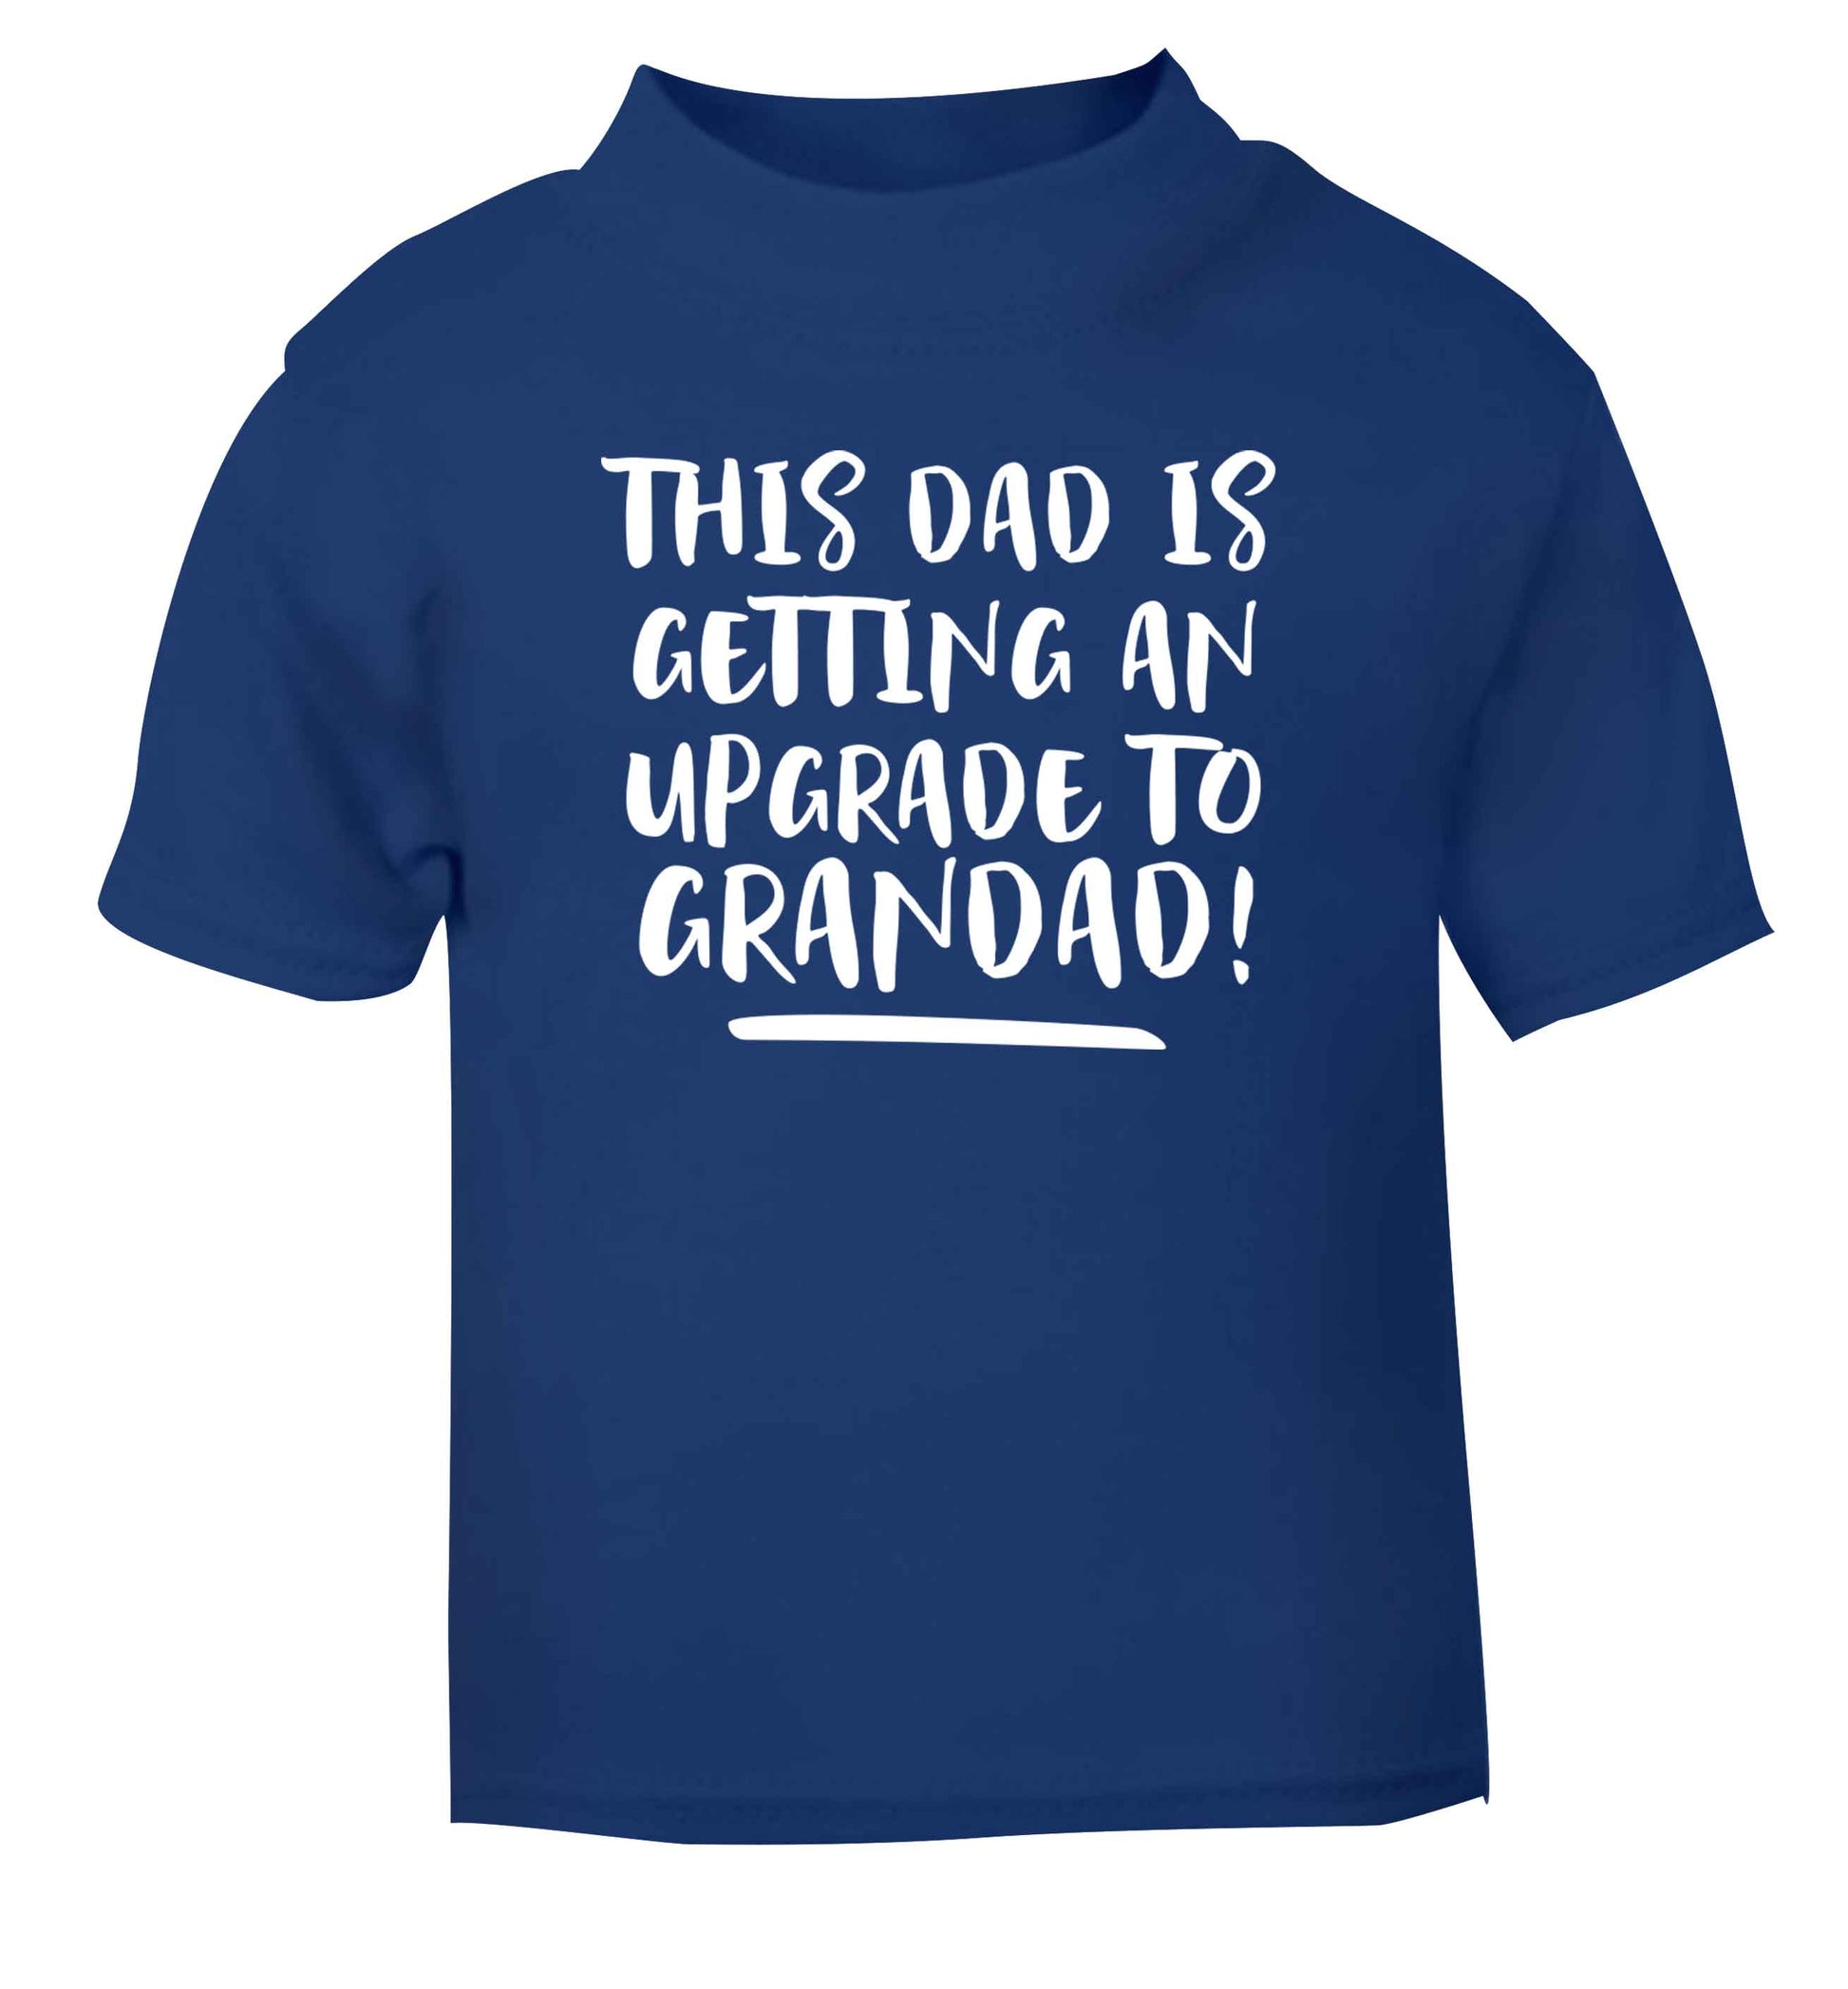 This dad is getting an upgrade to grandad! blue Baby Toddler Tshirt 2 Years